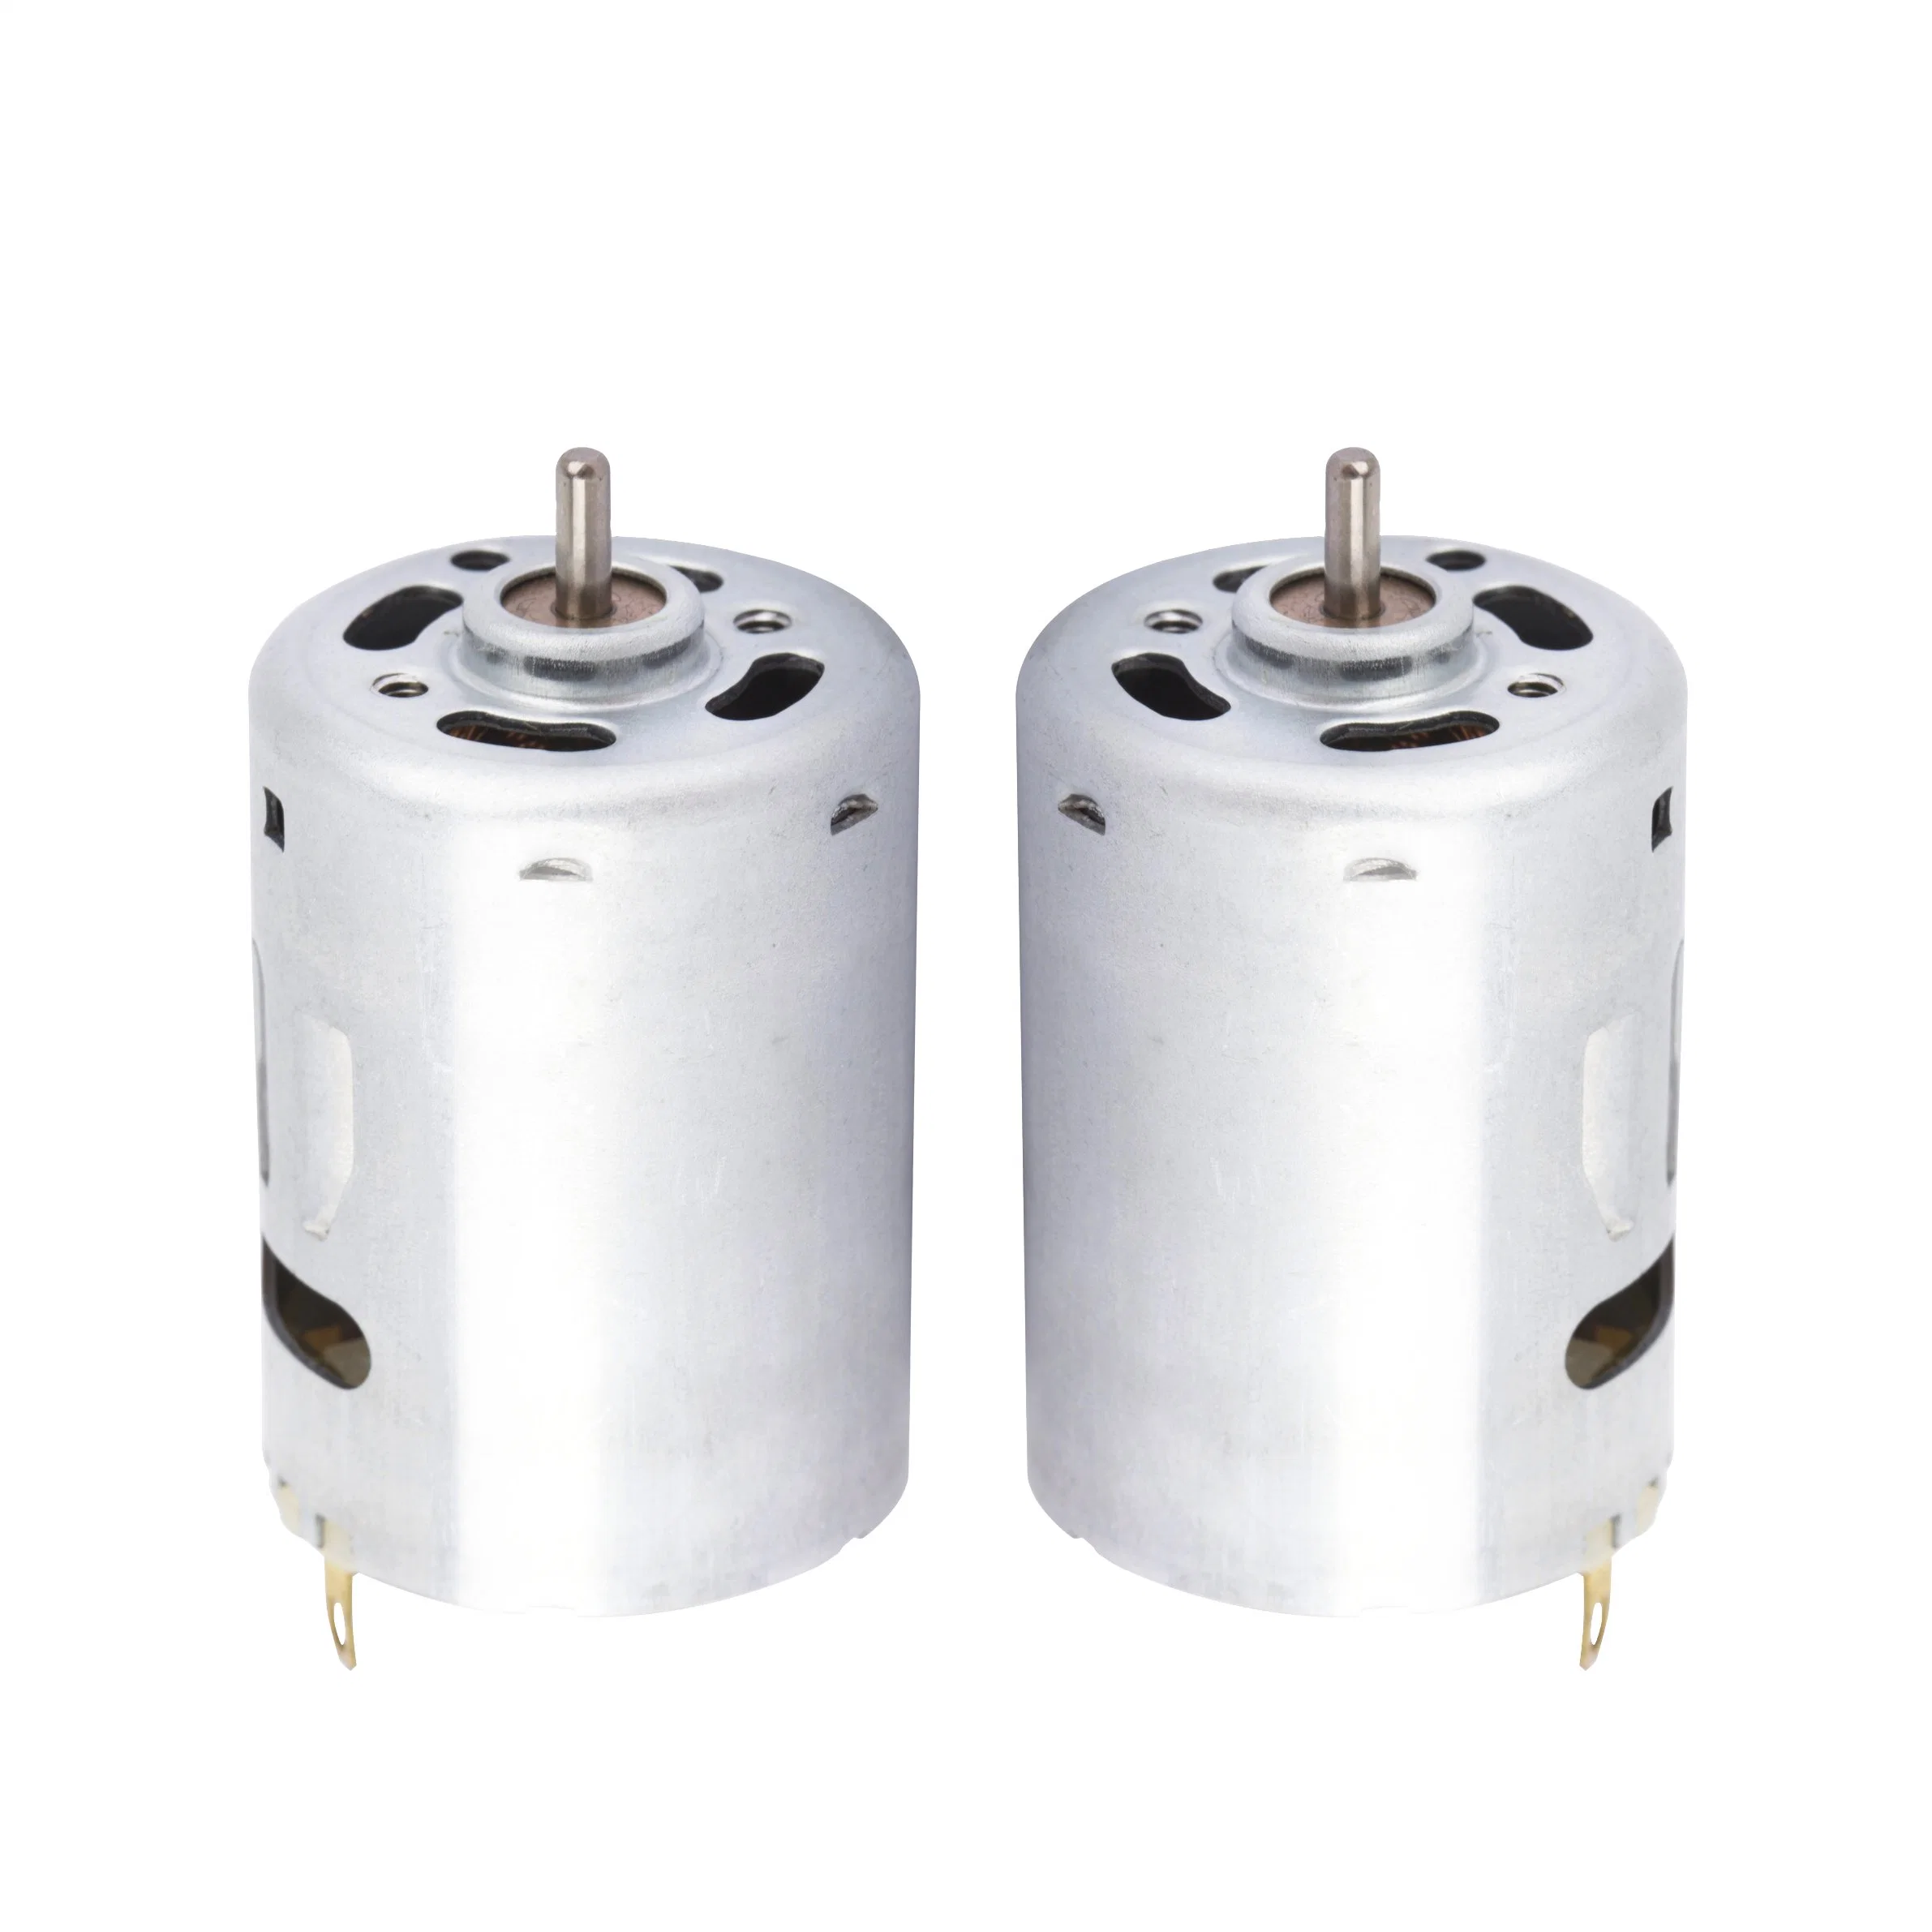 Kinmore 8 Volt DC Motor Vehicle DC Electric Motors DC Electric Motor Stable Performance